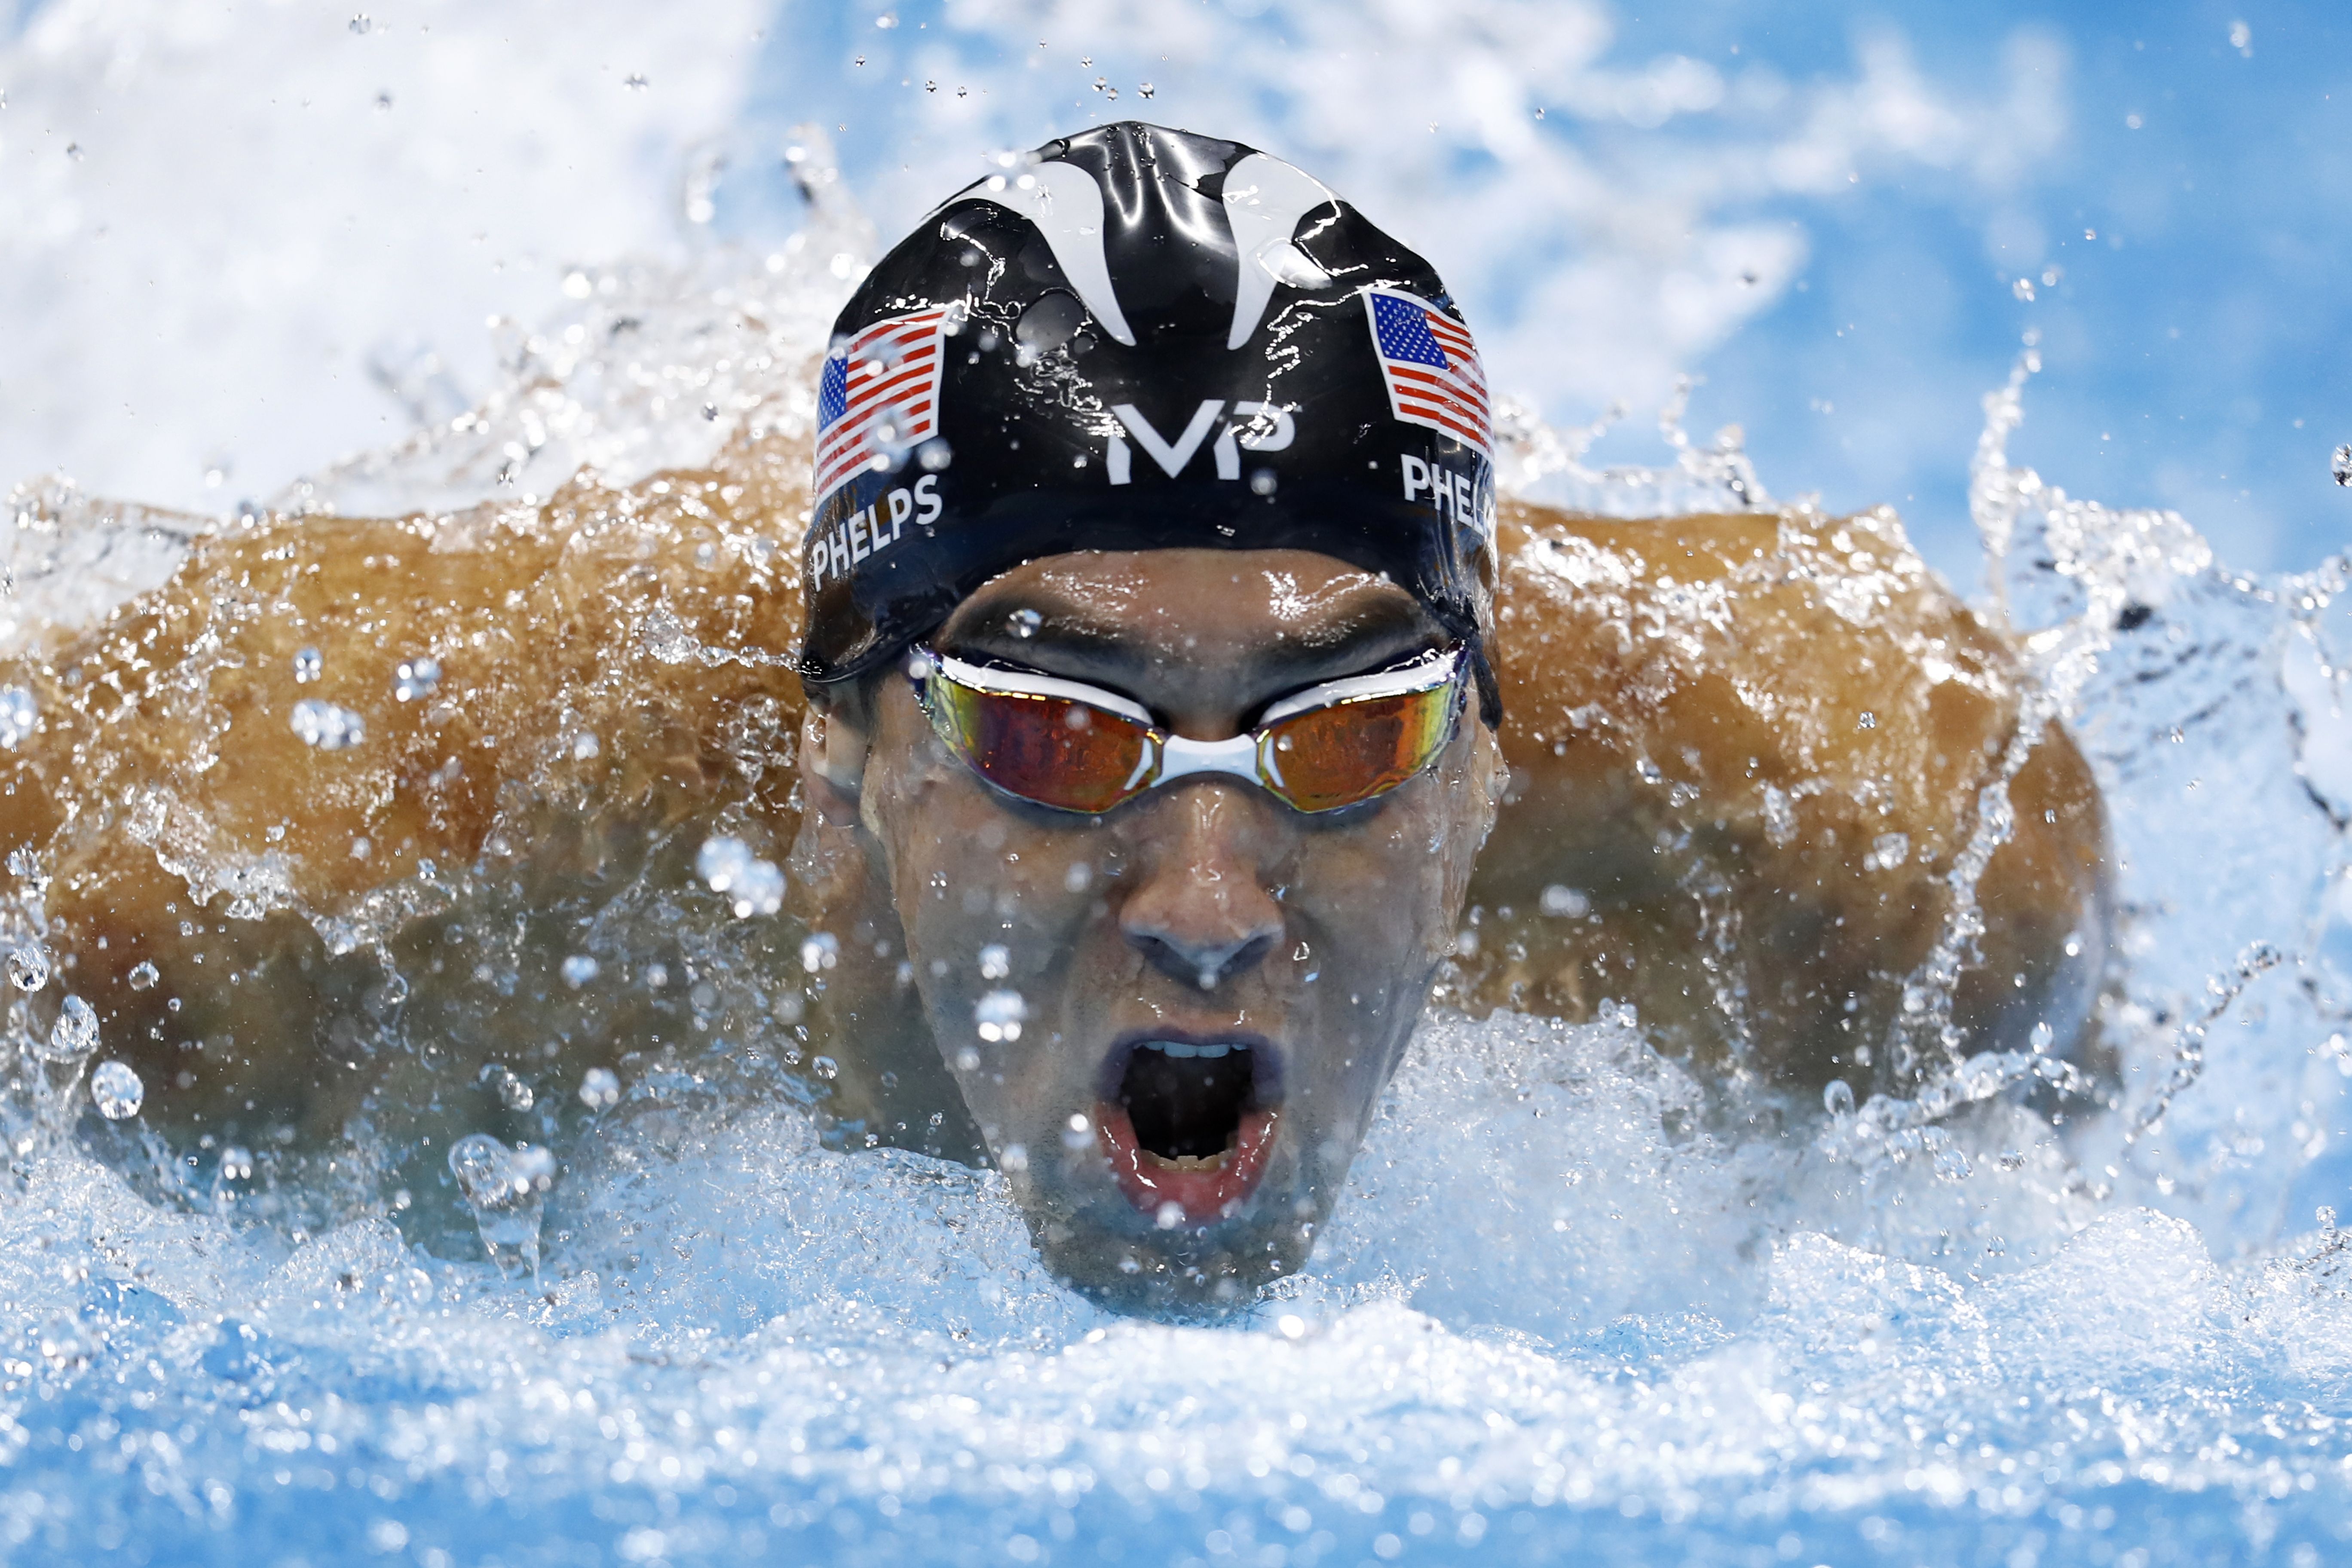 Michael Phelps competes in the Men's swimming 4 x 100m Medley Relay Final at the Rio 2016 Olympic Games at the Olympic Aquatics Stadium in Rio de Janeiro on August 13, 2016